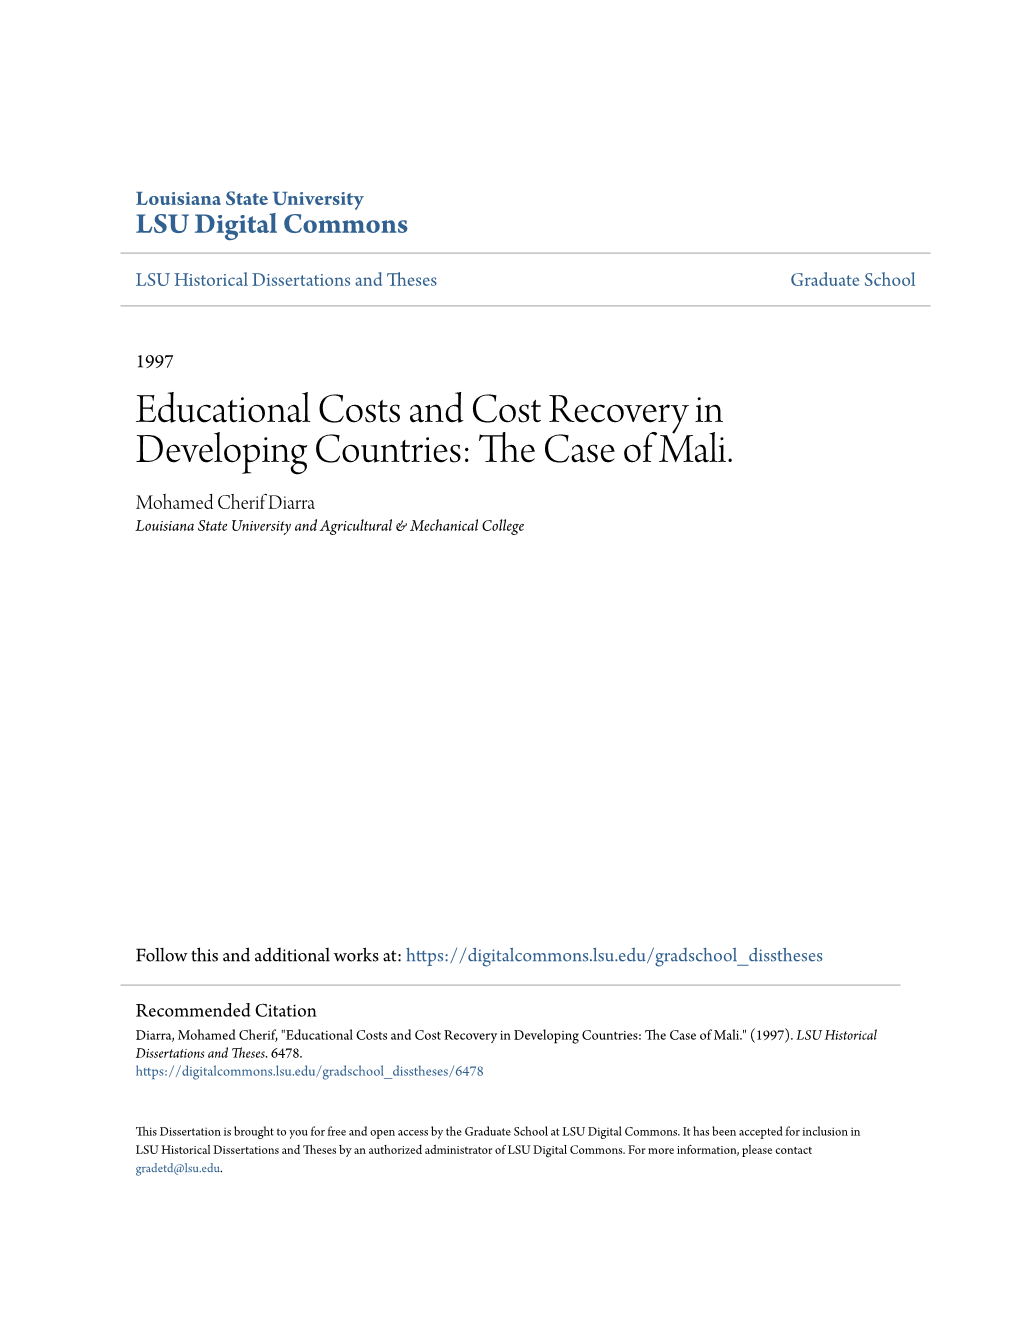 Educational Costs and Cost Recovery in Developing Countries: the Ac Se of Mali